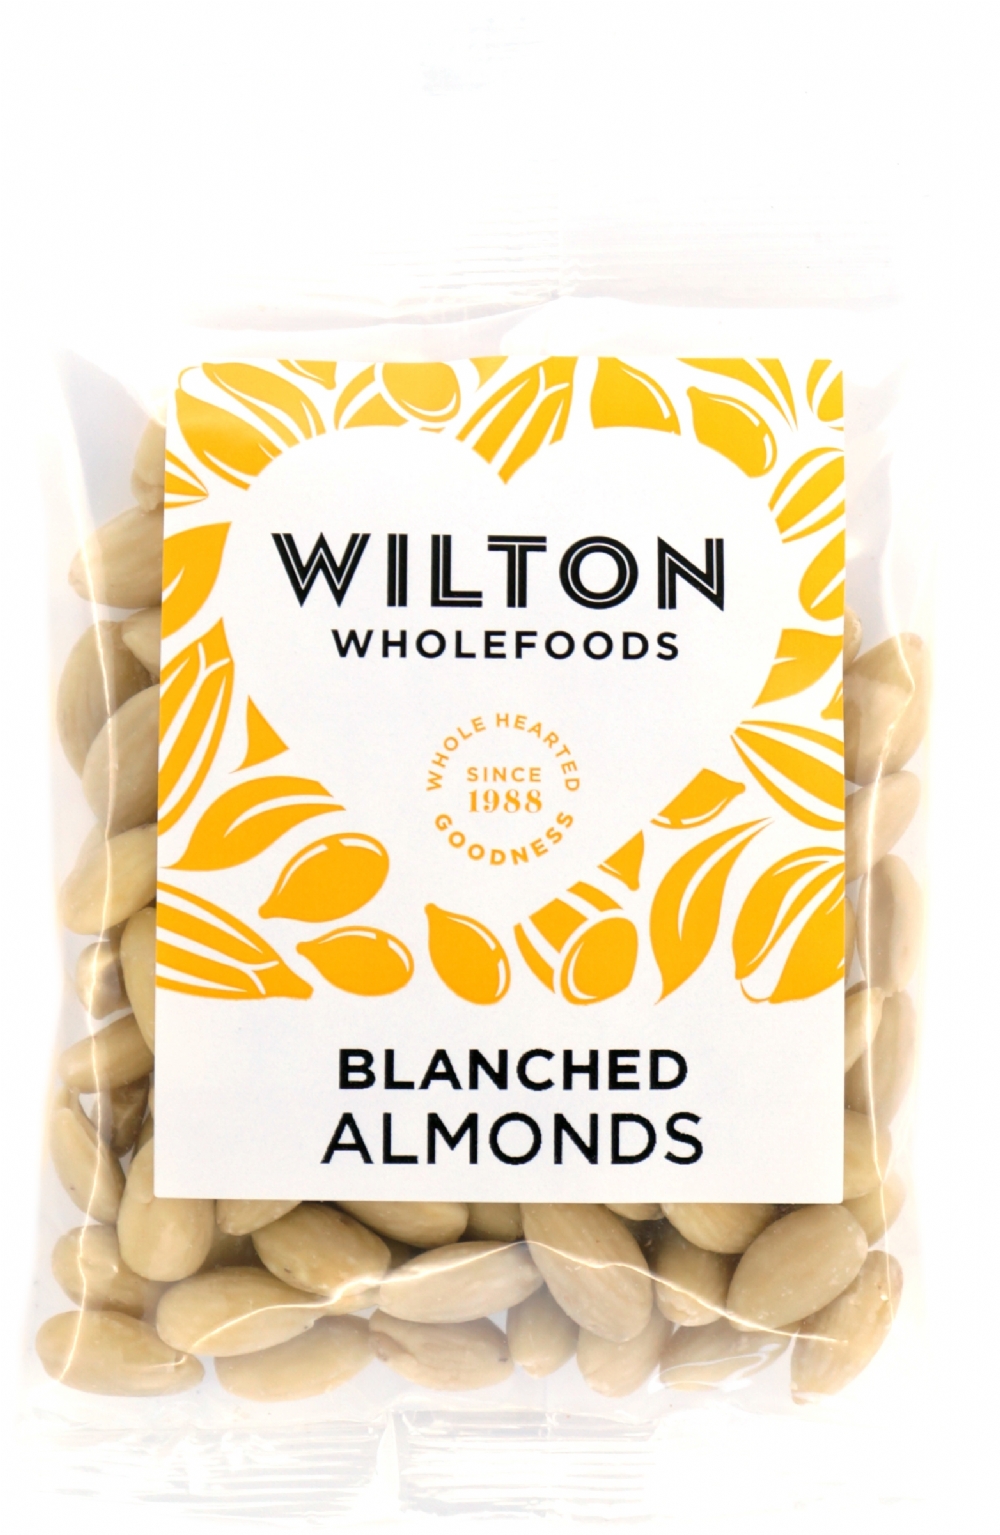 WILTON Blanched Almonds 100g